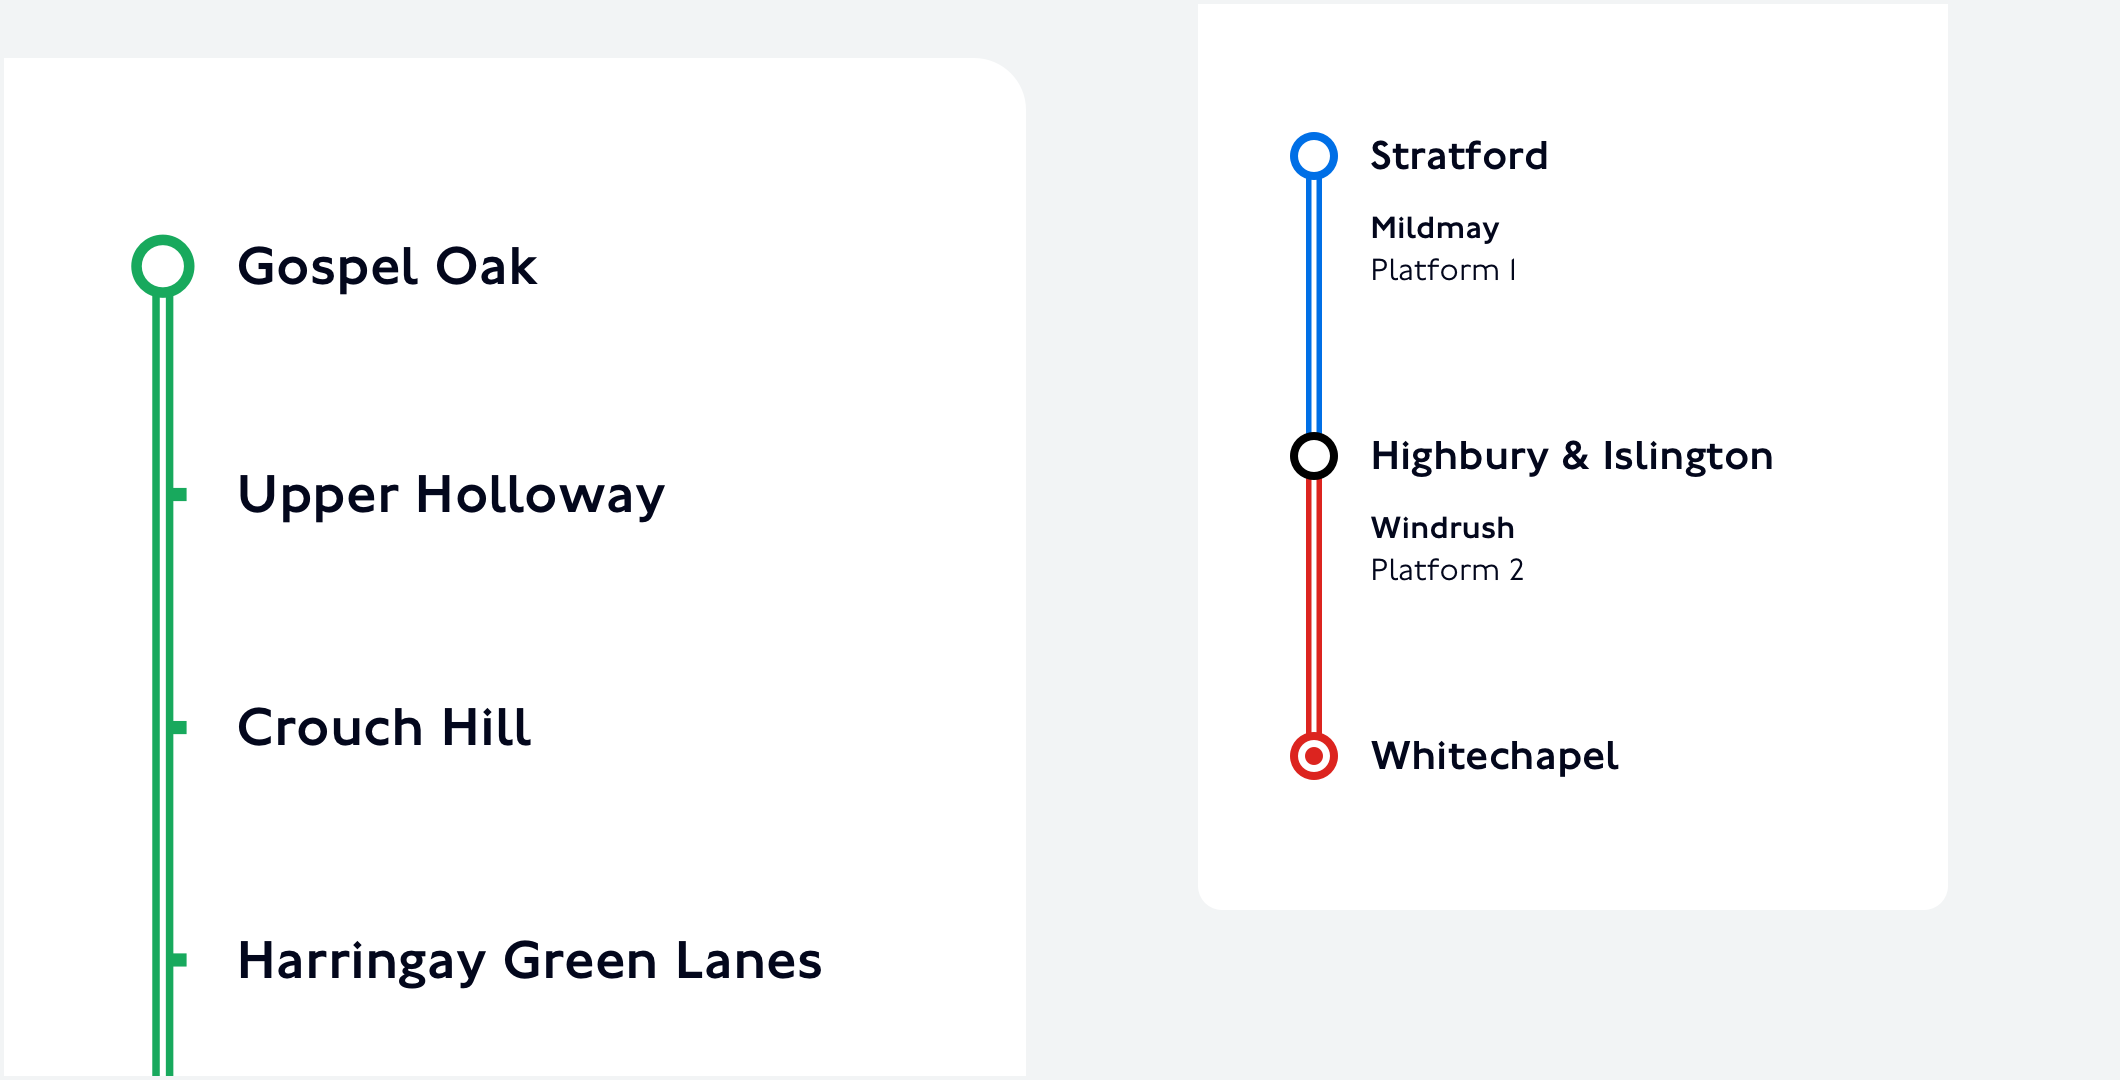 Two examples of diagrams representing journeys in London Overground lines. The first one includes a vertical dual line in green with a list of station names displayed vertically to its right. The second one includes a vertical dual line in blue connected to another vertical dual line in red by a black circle. The names of three London Overground stations are displayed at the start, middle and end of this diagram. The text “Mildmay, platform 1” is displayed next to the blue line, and the text “Windrush, platform 2” is displayed next to the red line.